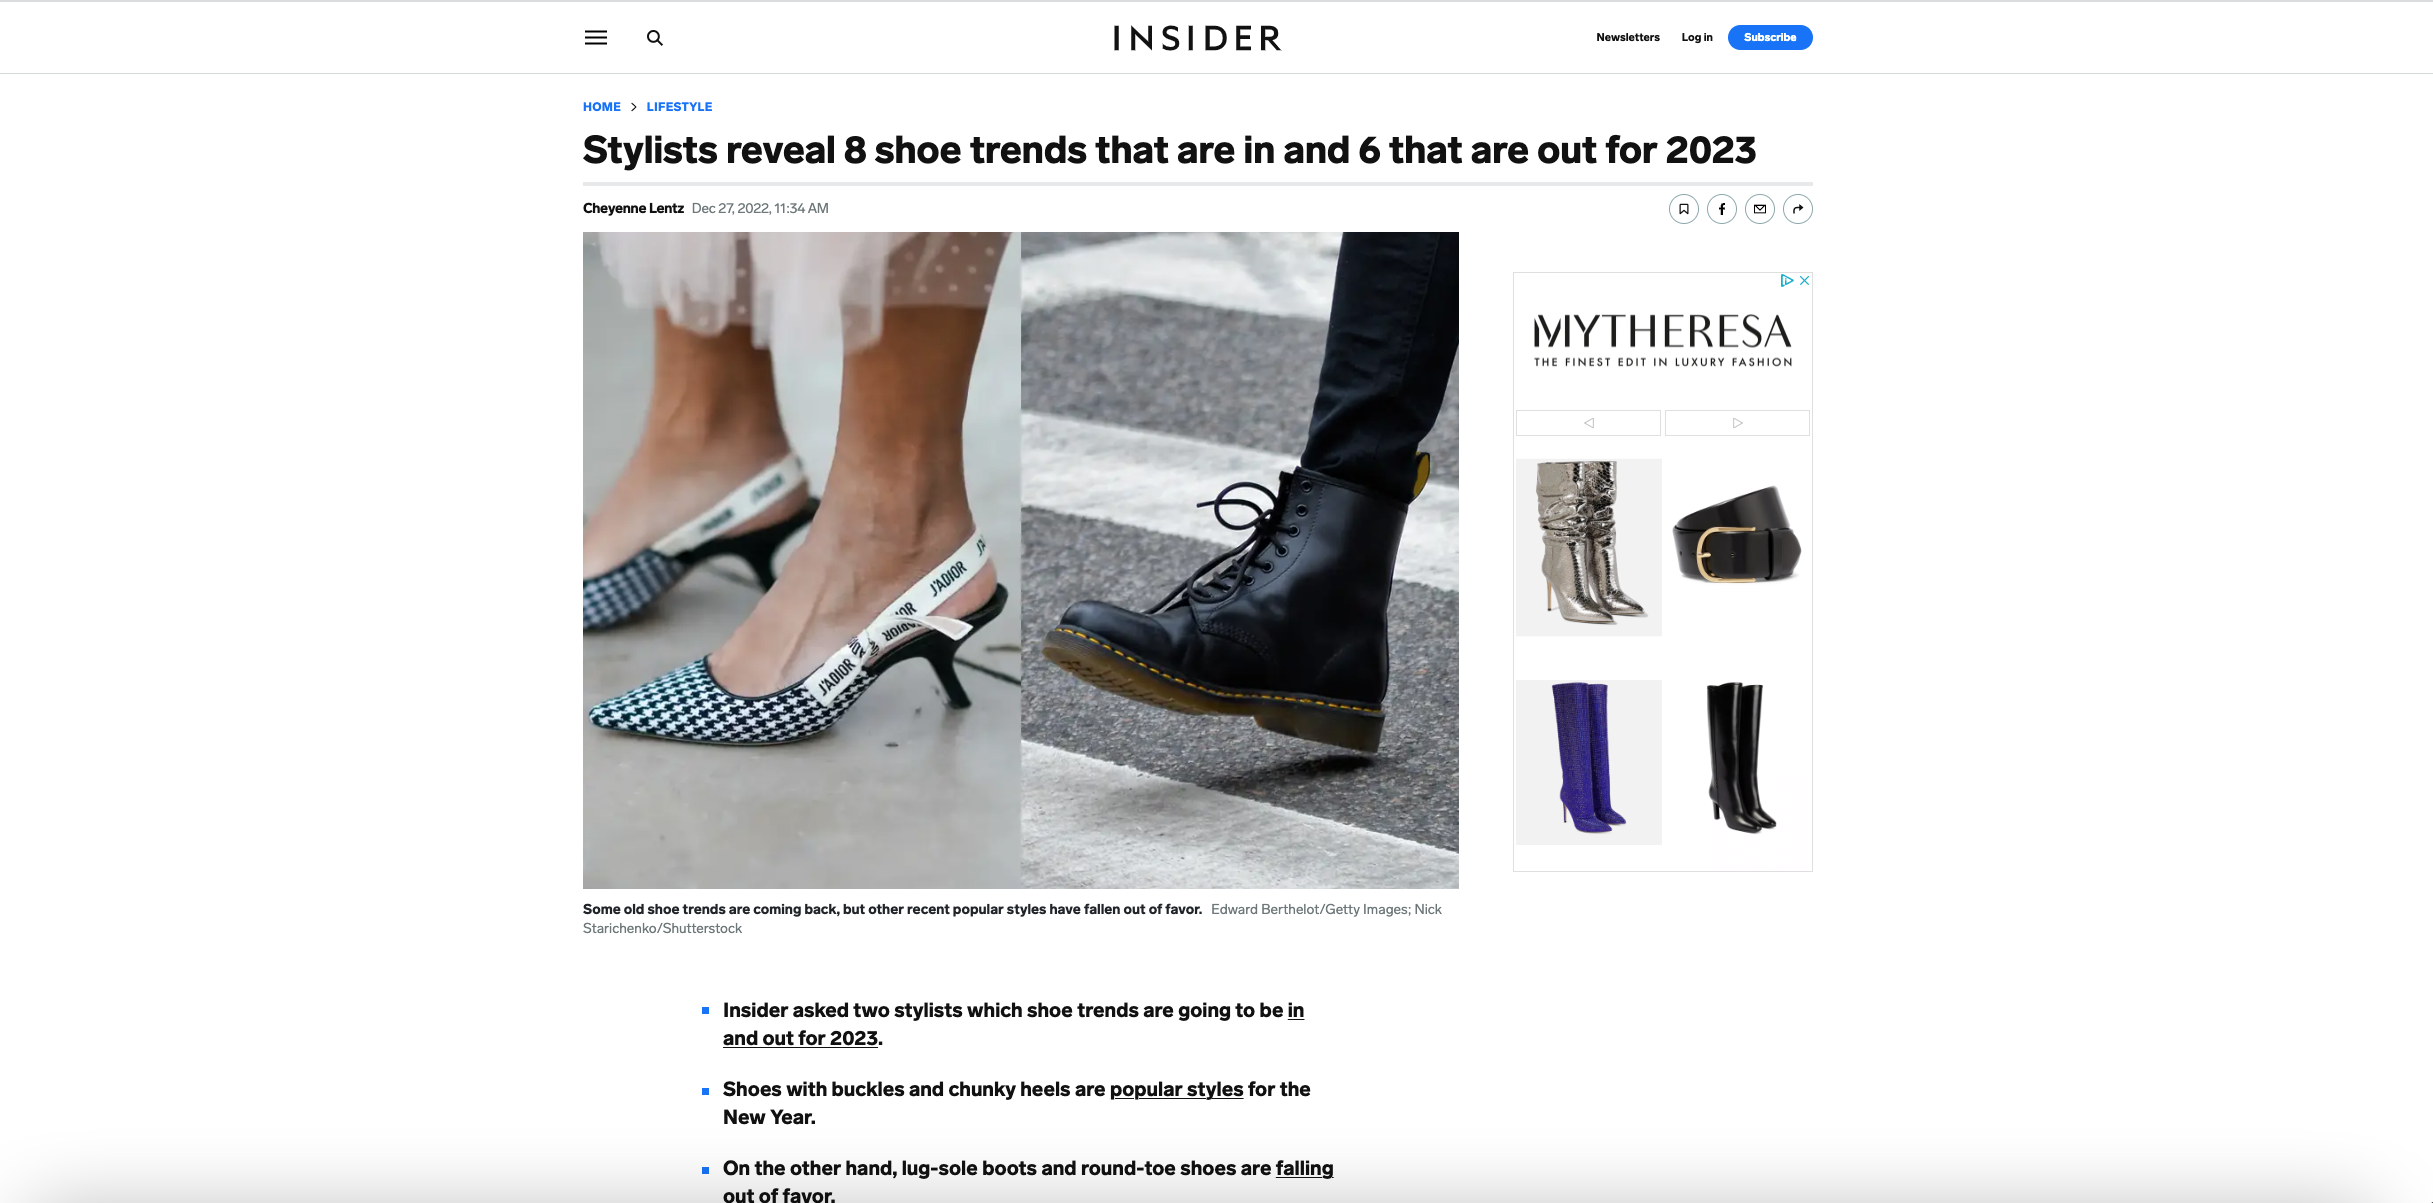 Insider: Stylists reveal 8 shoe trends that are in and 6 that are out for 2023